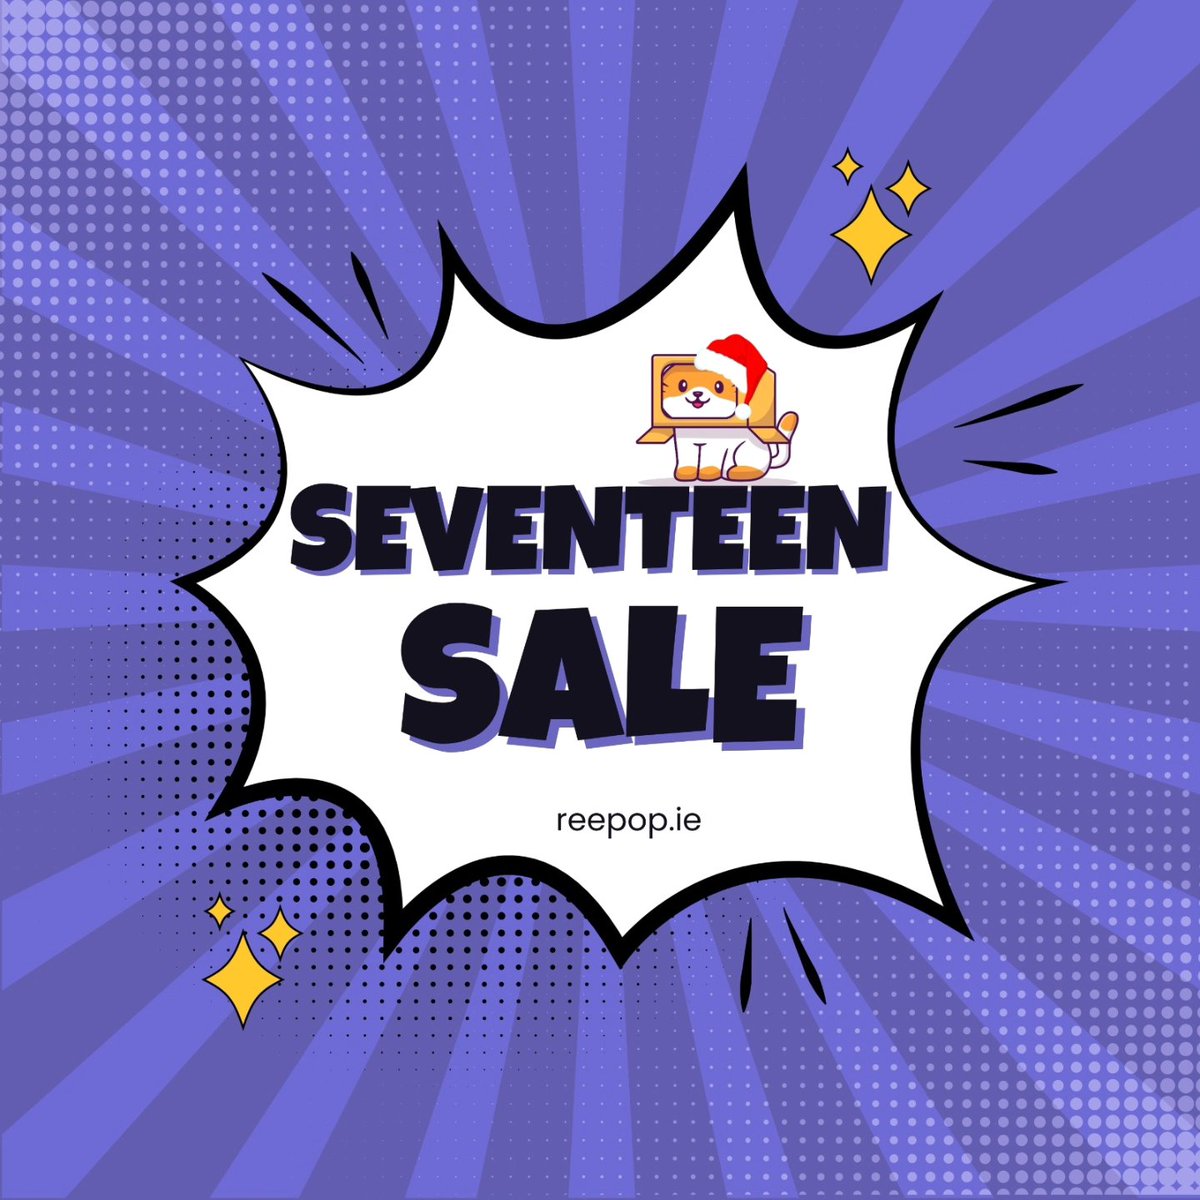 ✨️DAY ELEVEN✨️

CARATS! We've got a huge sale on all our on-hand Seventeen products! 💜

Grab your goodies while stocks last 😍
Sale ends midnight tonight ❗️

#kpop #svtsale #kpopireland #kpopuk #kpopeurope #christmasdeals #bts #svt #seventeen